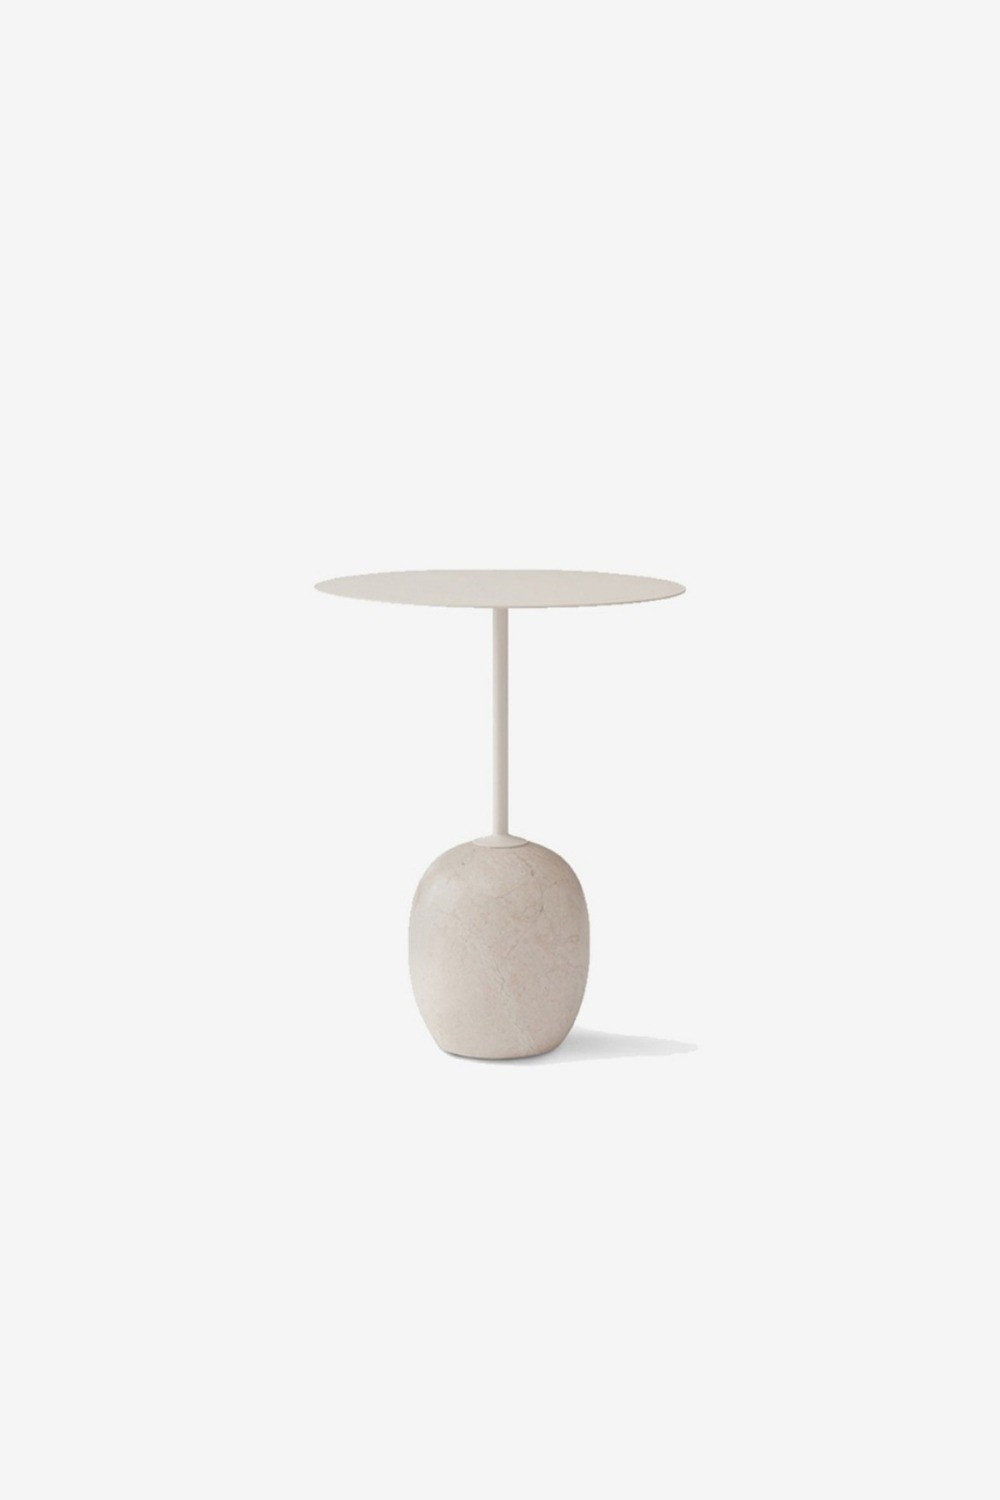 [&amp;Tradition] Lato side table/ LN8 (Ivory White)